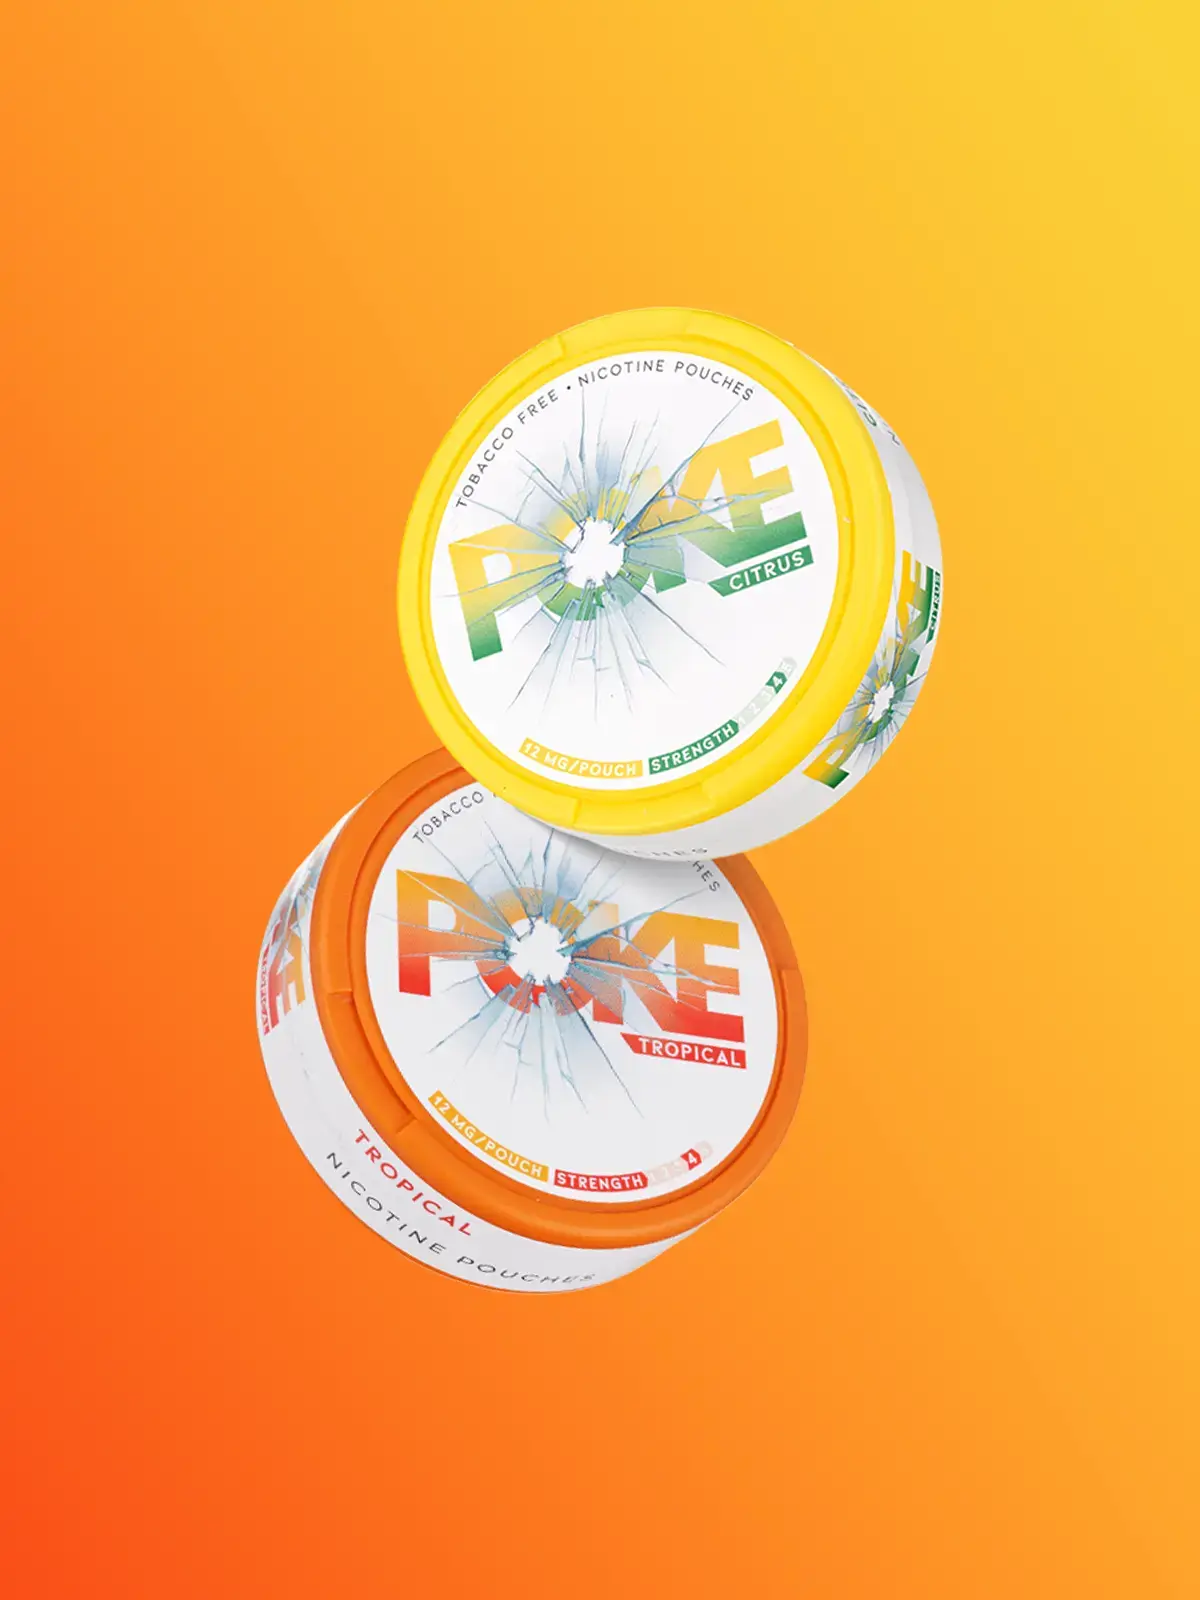 Two containers of Poke nicotine pouches in Citrus and Tropical flavours, floating in front of a warm yellow and orange background